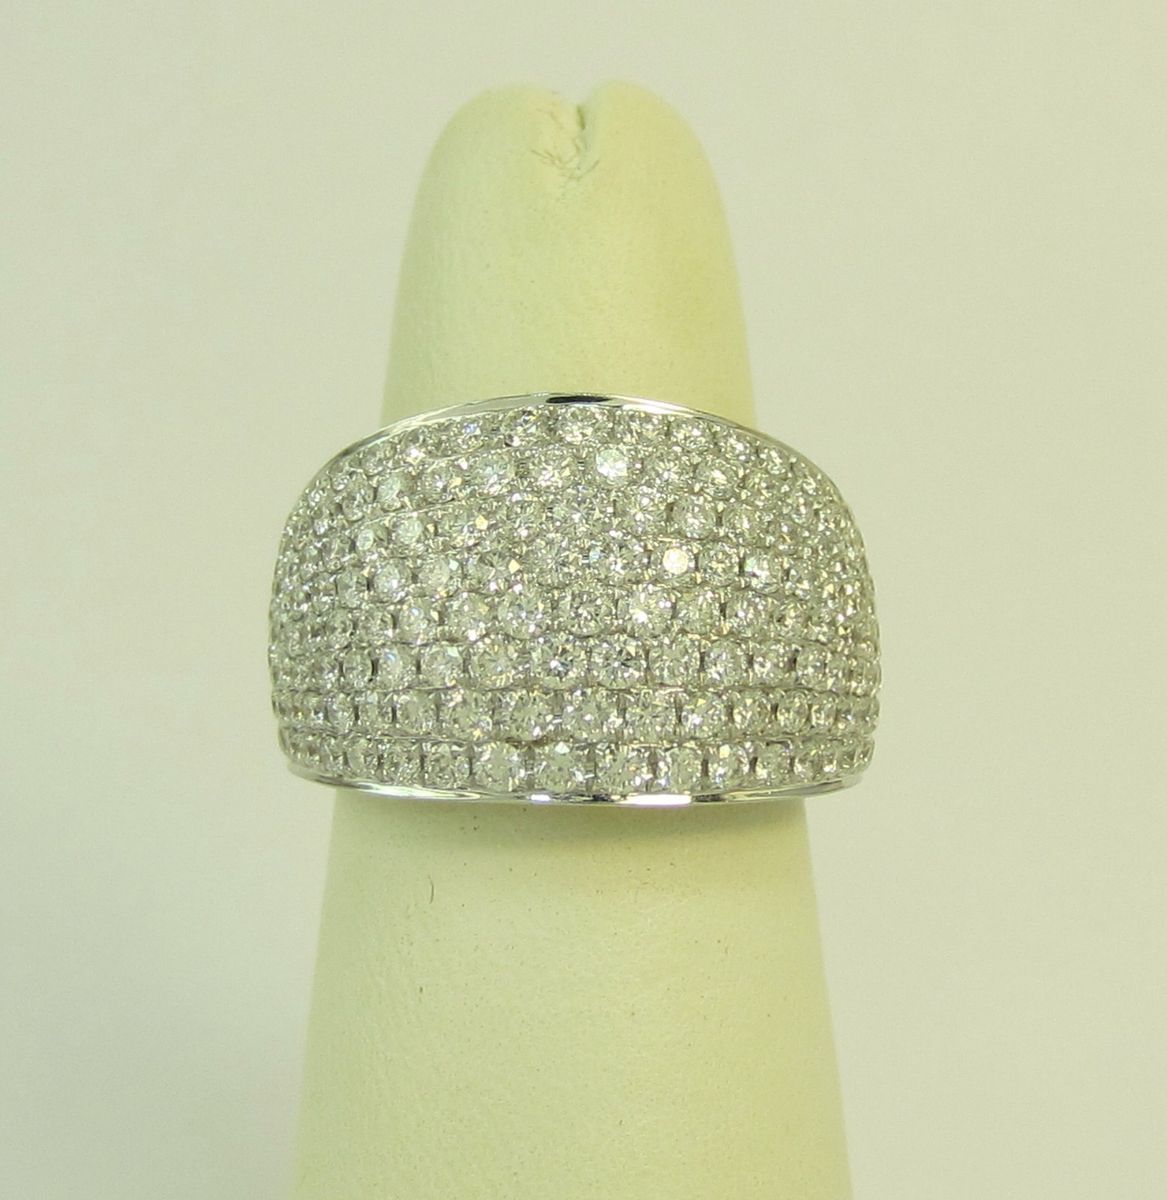 18K Gold and Pave Diamond 3 30 Ct TW Dome Wide Ring